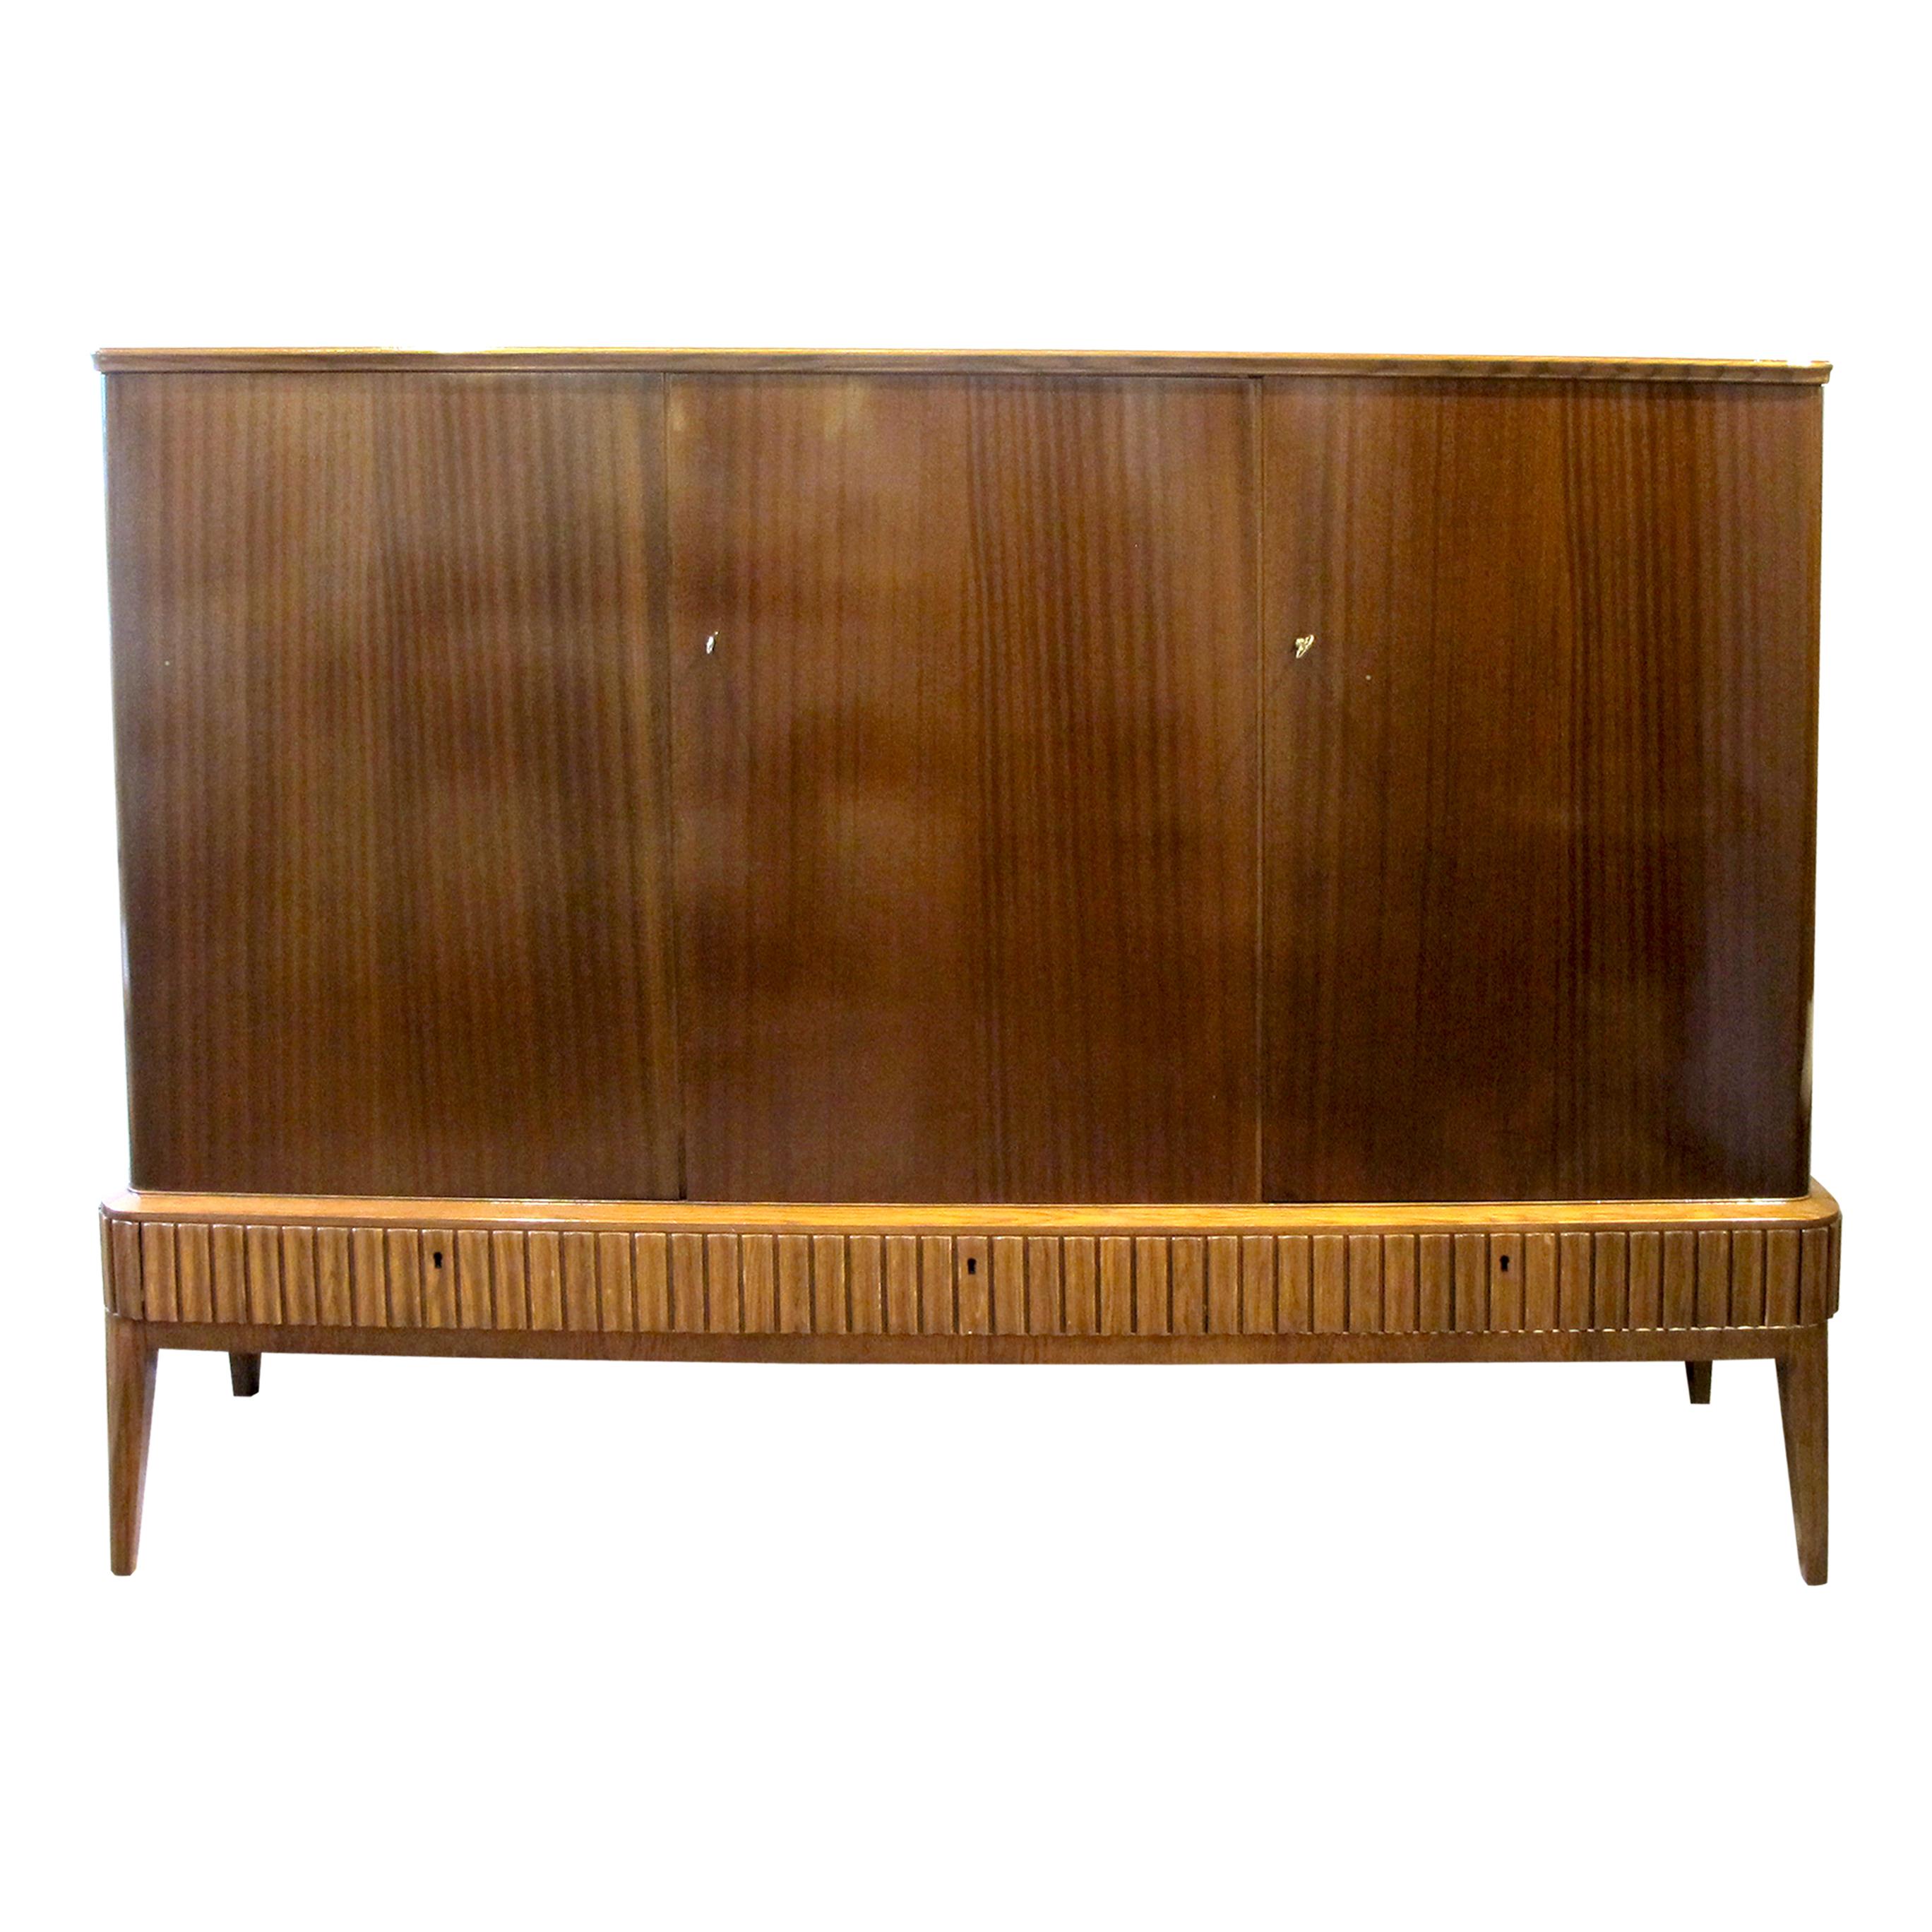 Exceptional elegant and tall Cuban mahogany sideboard/cabinet in great condition produced by Blomstermåla Möbelfabrik in Sweden in the 1940s. This well-made cabinet offers plenty of storage with double doors with adjustable shelves on the left and a